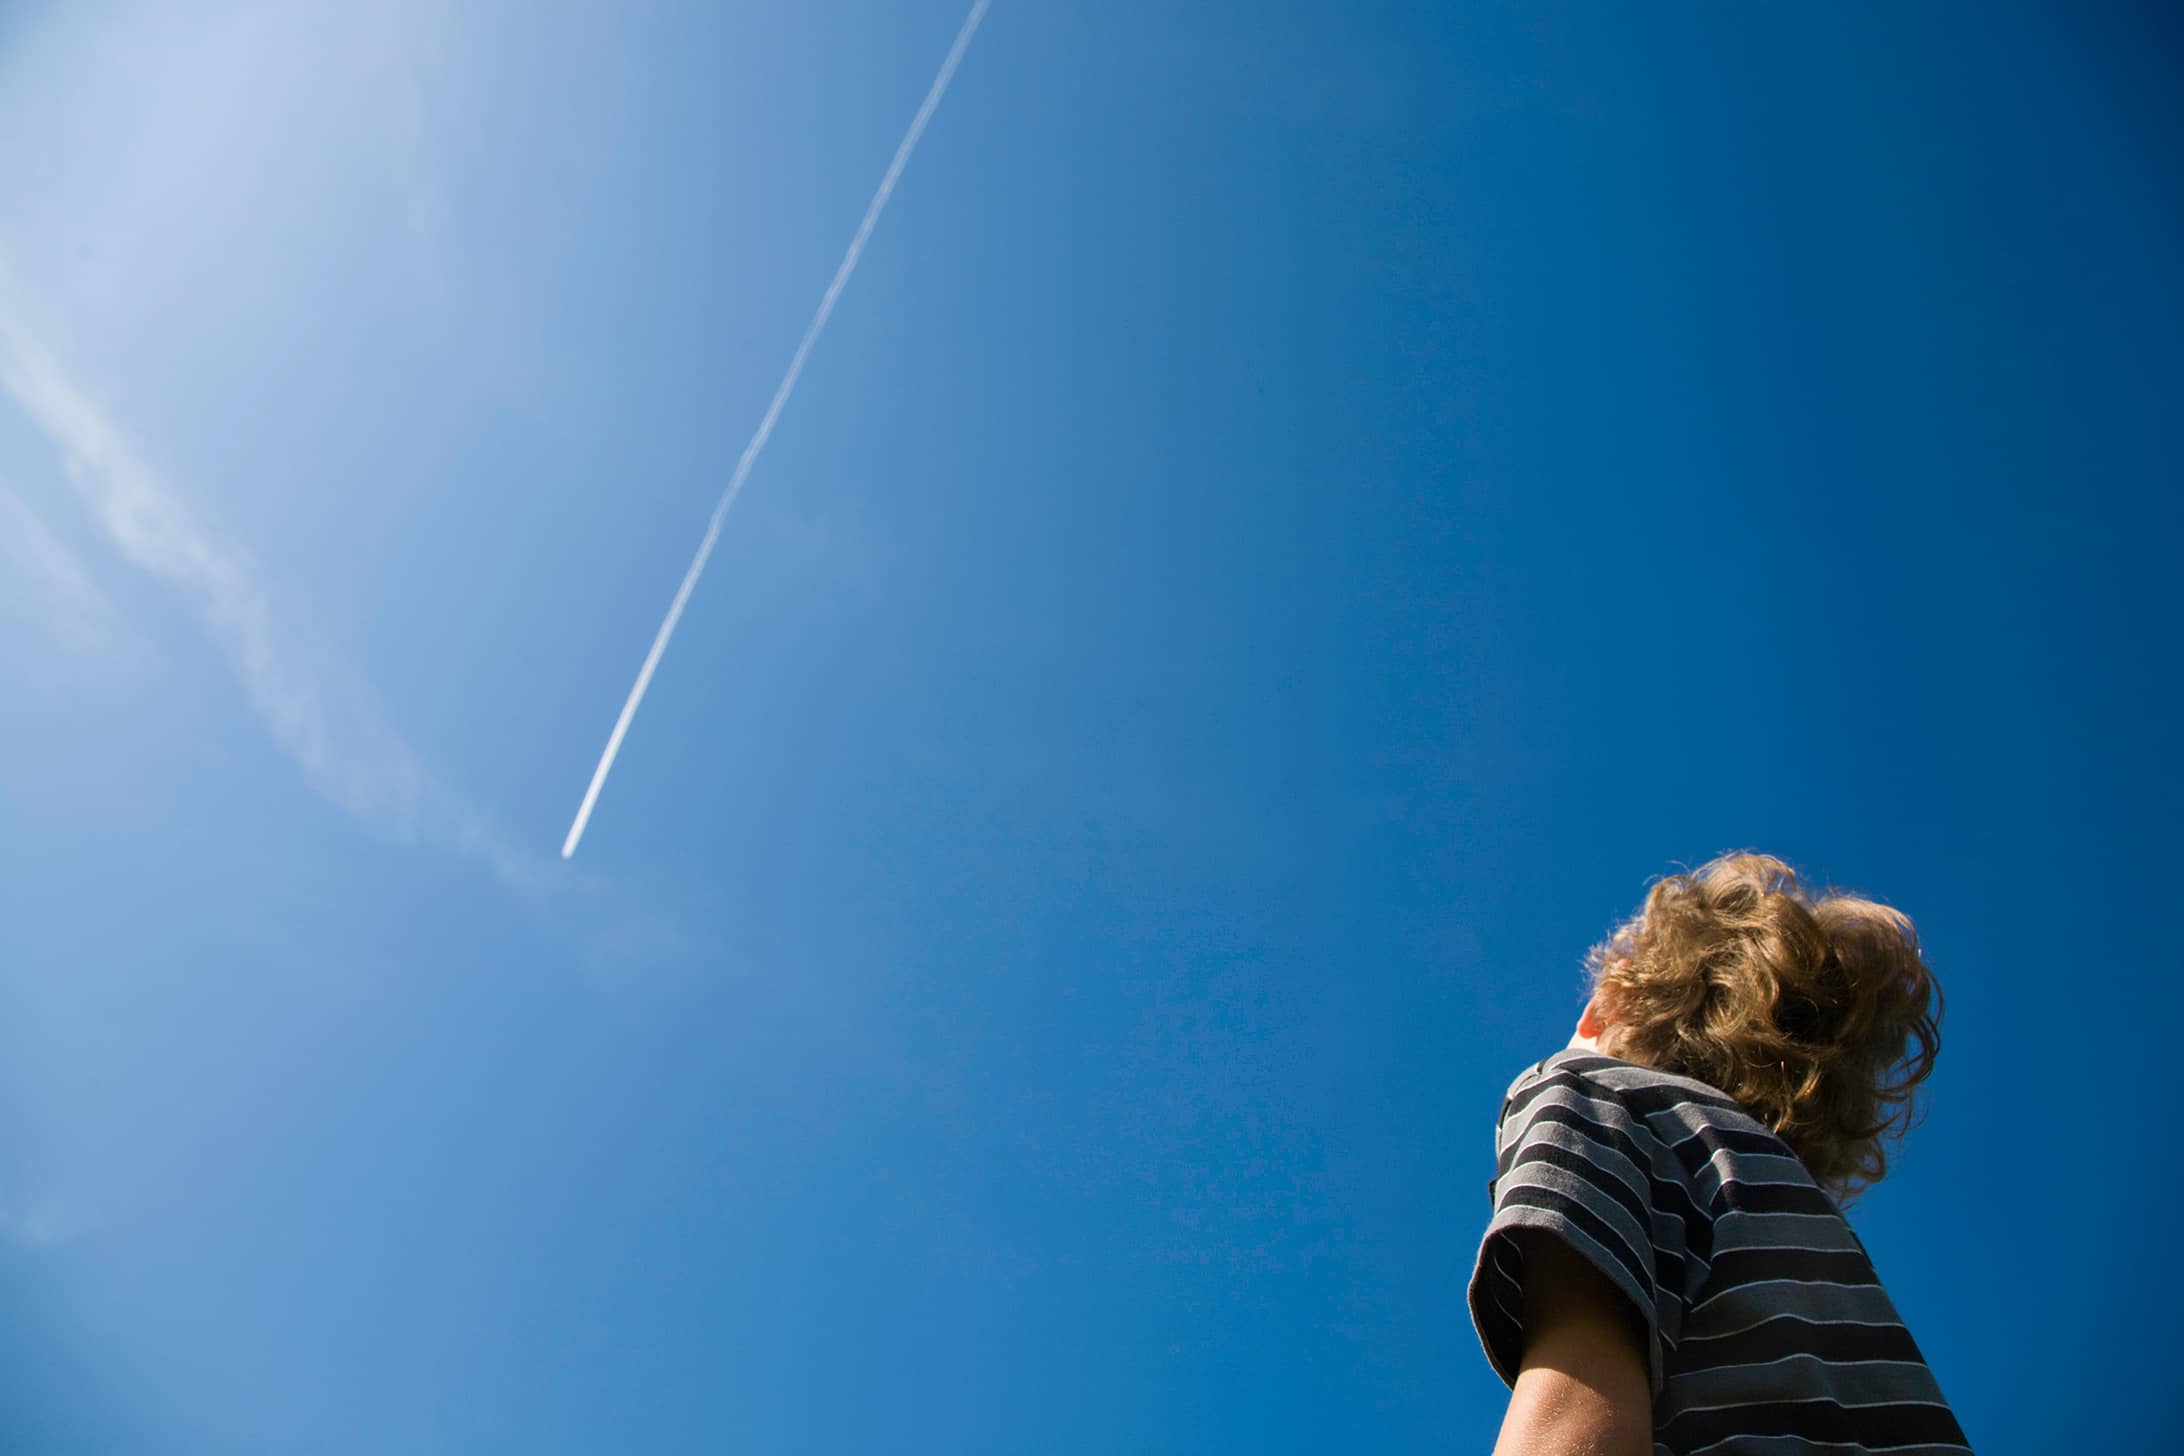 A young child watches a plane create a contrail against a clear, blue sky.